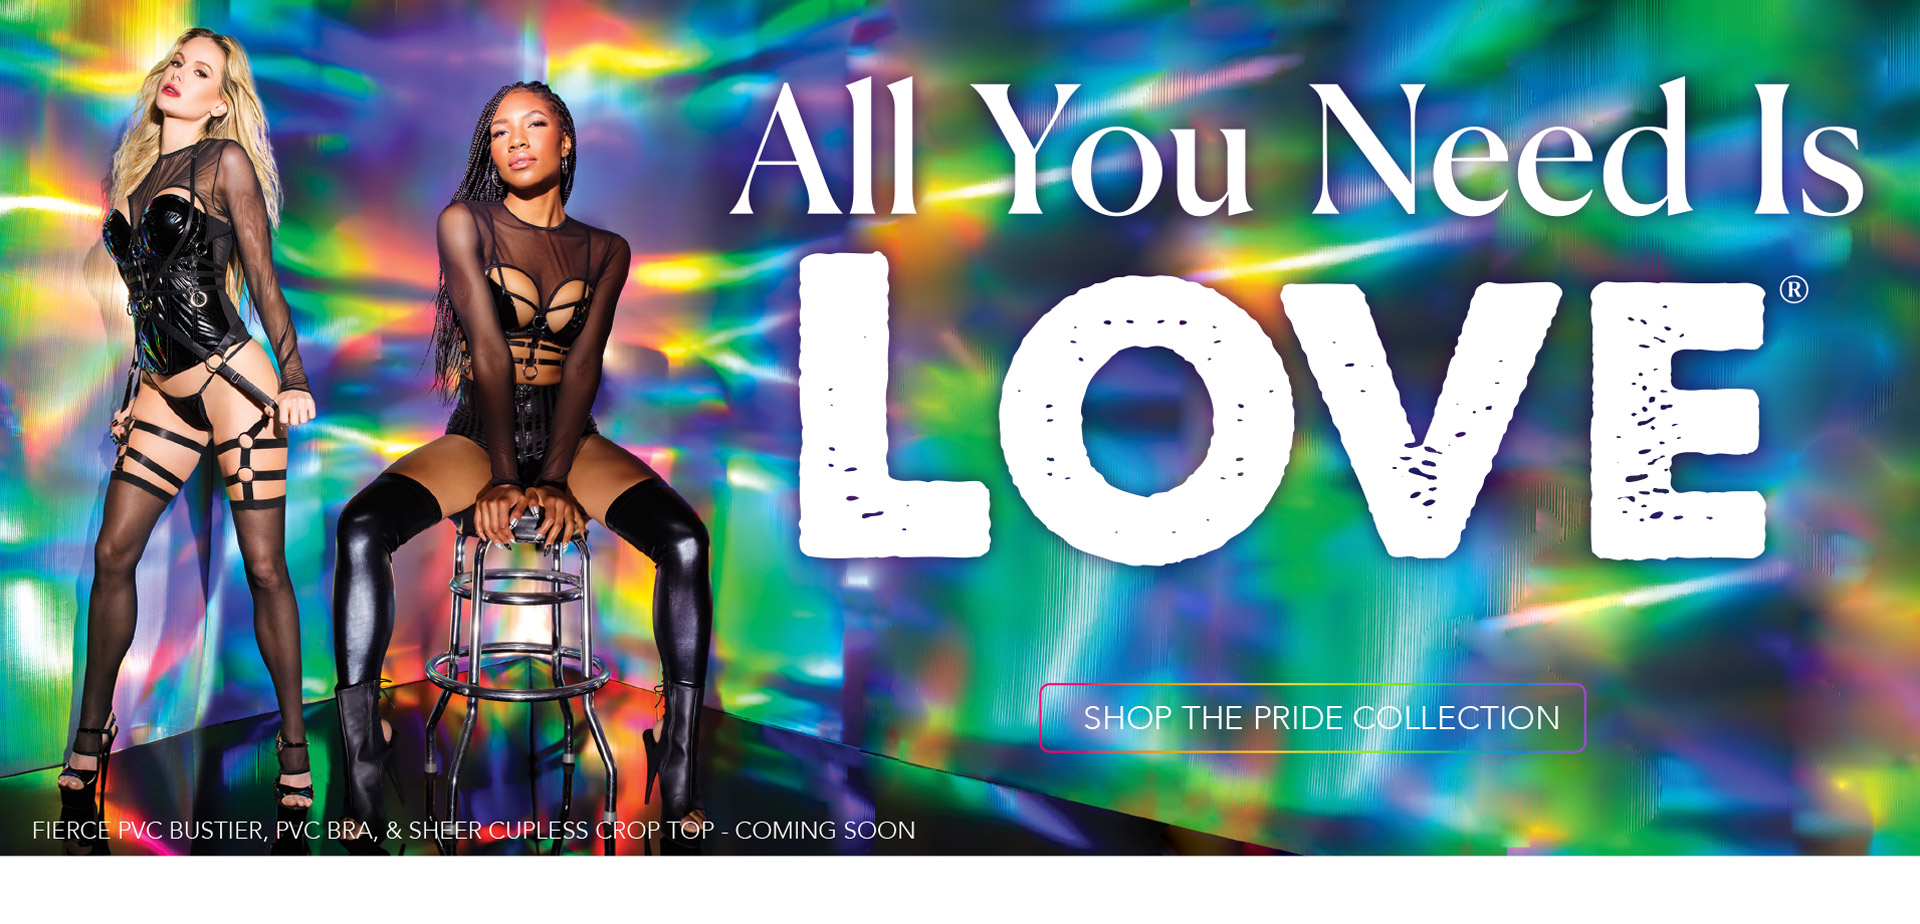 All you need is Love - Shop the Pride Collection